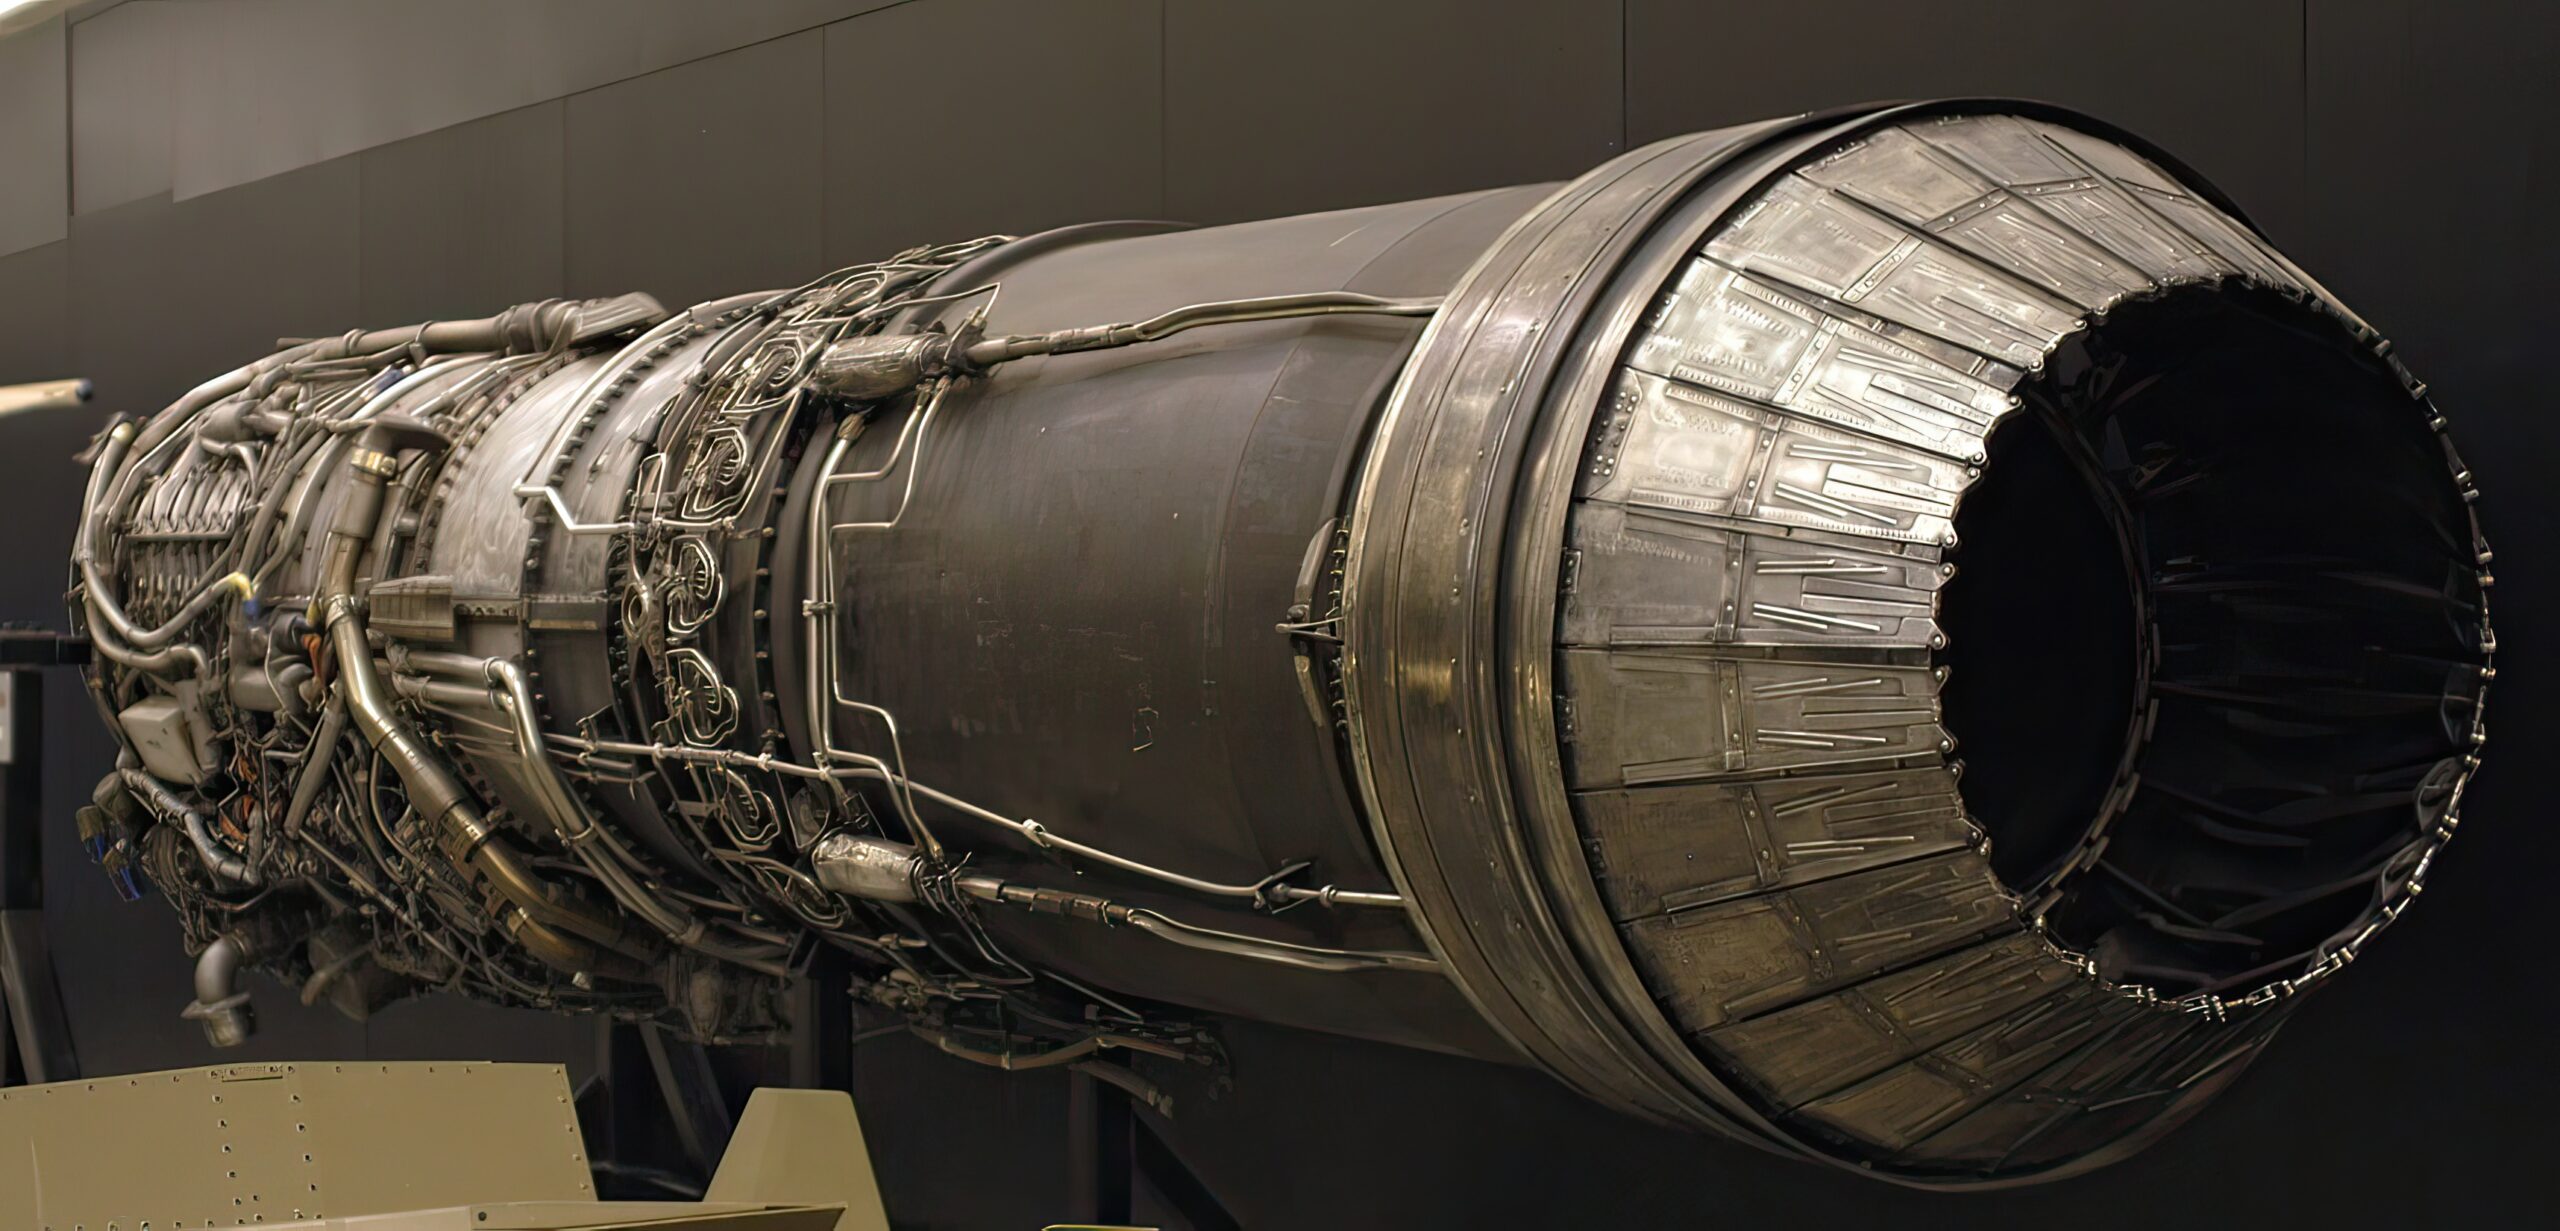 General Electric J79 Jet engine in the National Museum of the United States Air Force